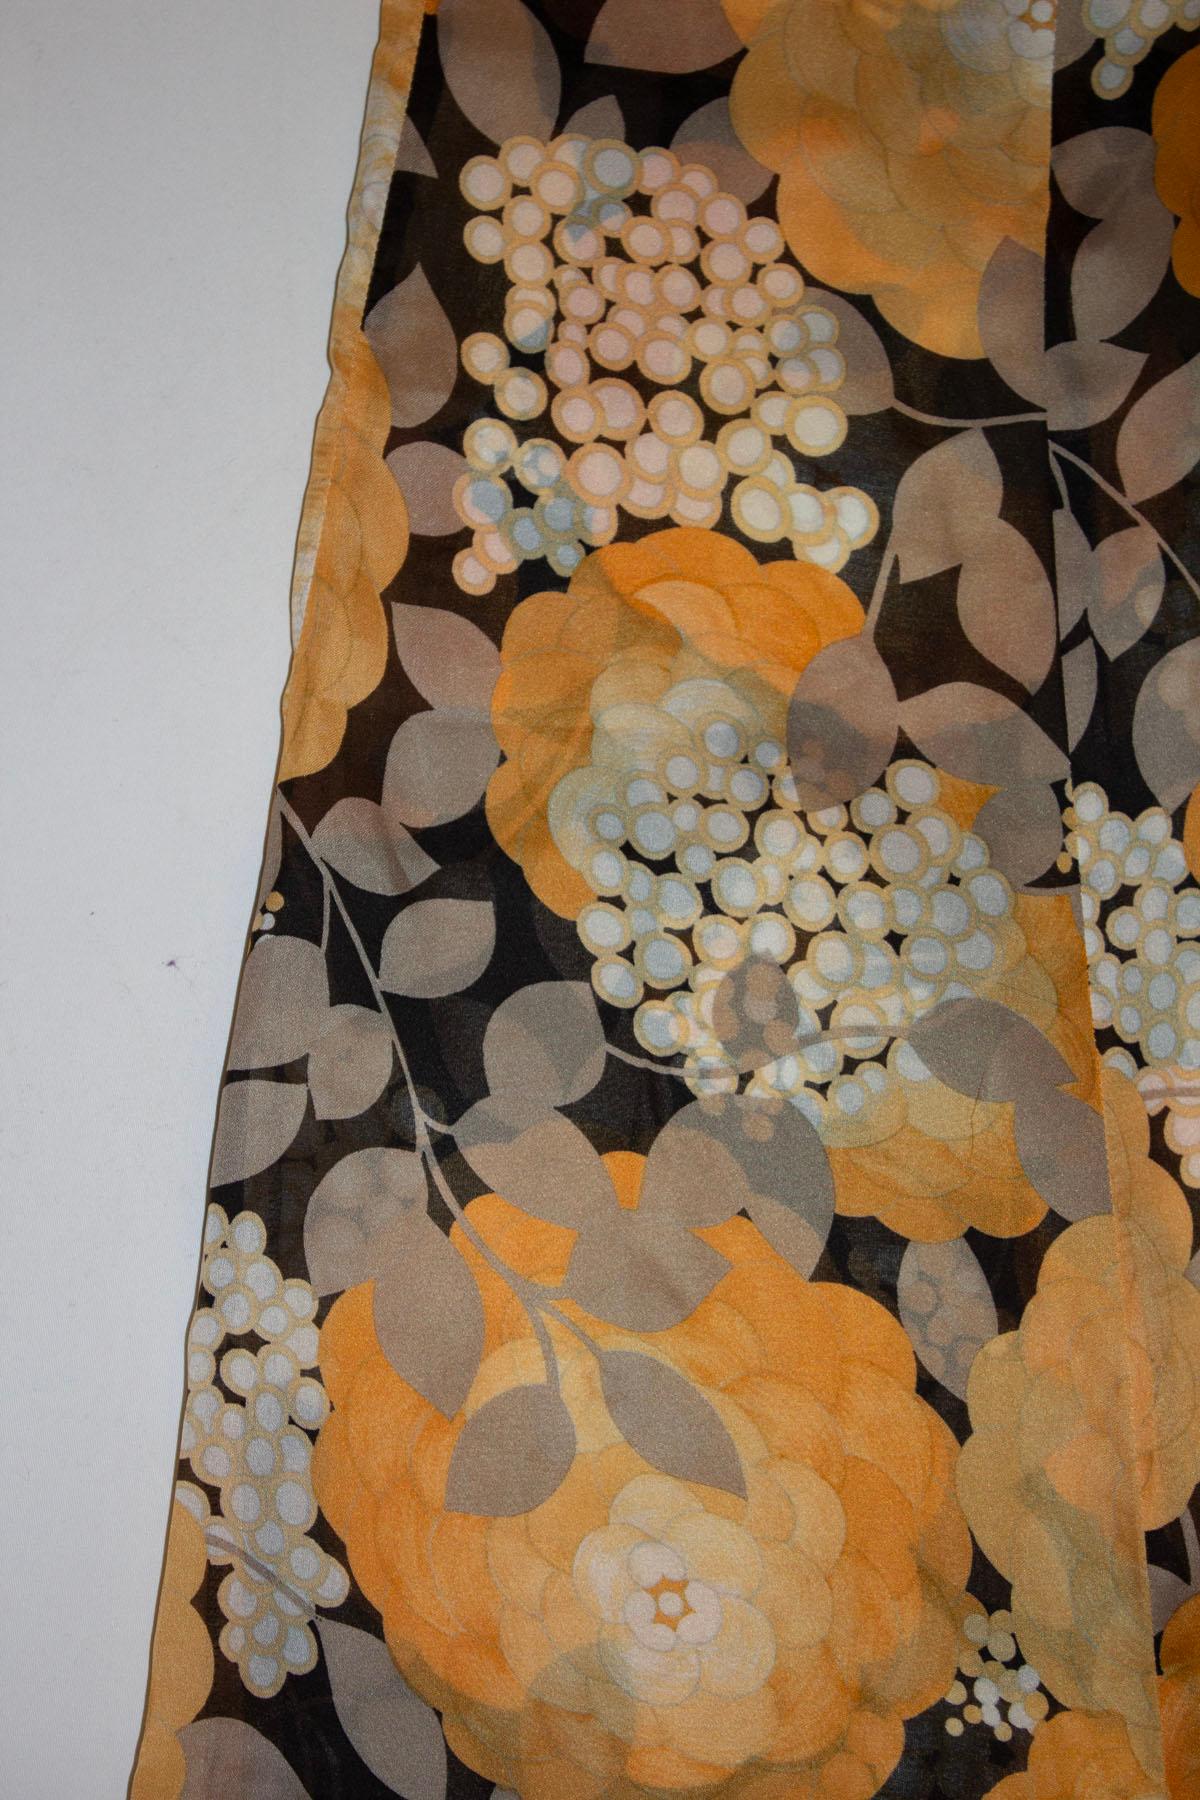  A stunning pair of vintage silk pants , made in France for Bonwit Teller. The pants are in a wonderful floral print, in black, orange and white.  They have a back zip opening. Measurements: waist 26''', inside leg 29'' plus 2 1/2 '' hem.